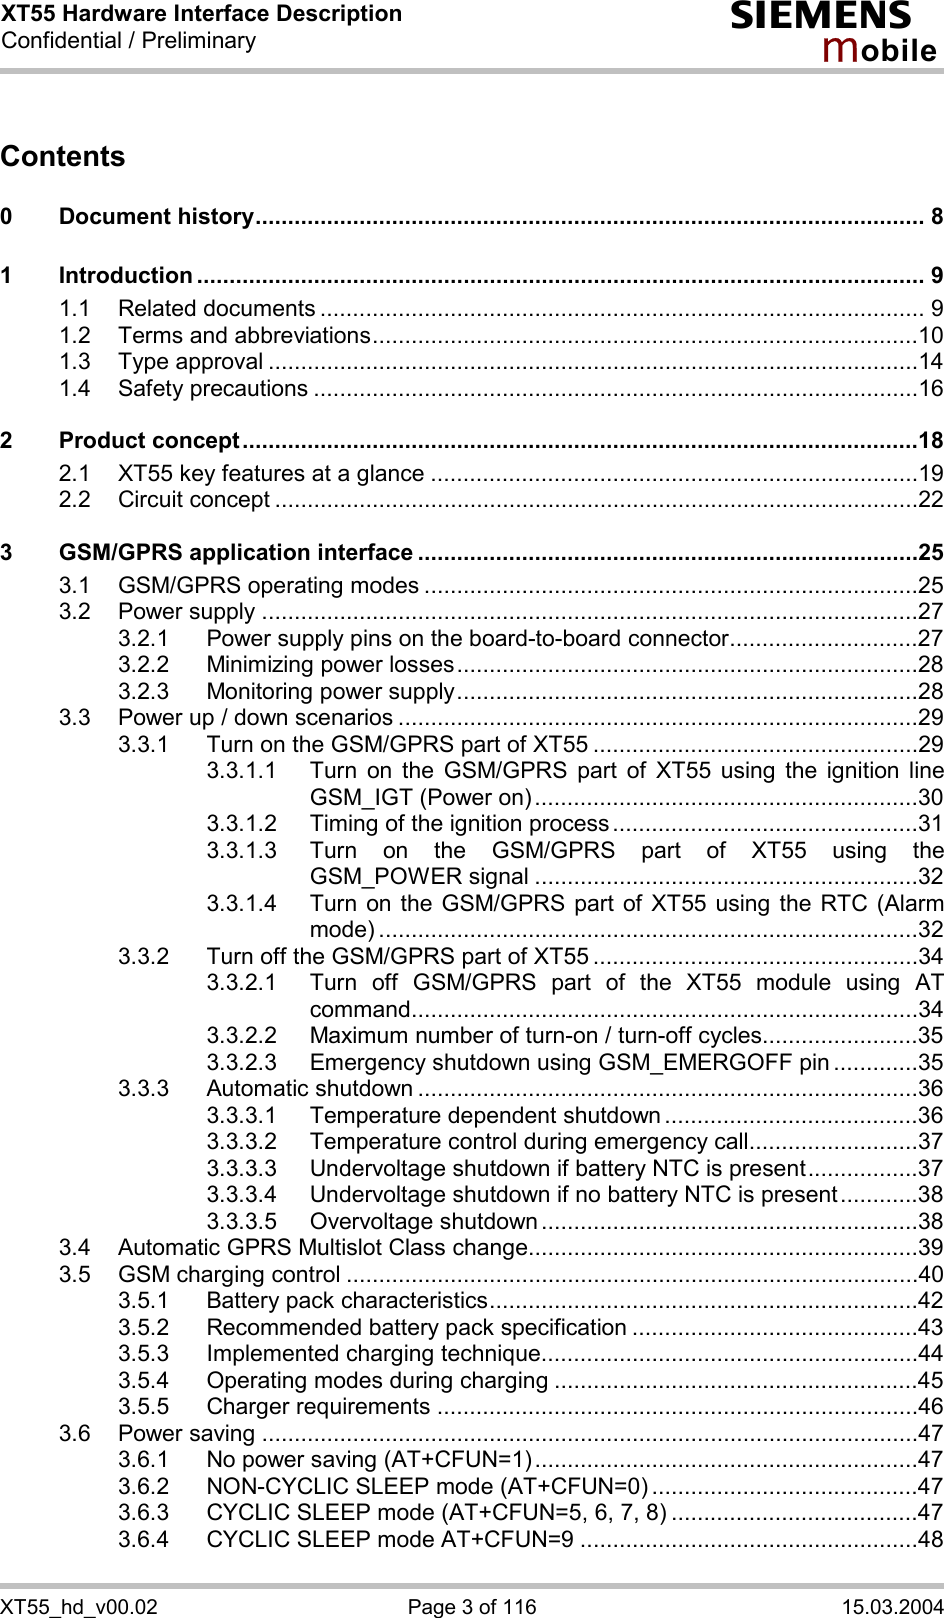 XT55 Hardware Interface Description Confidential / Preliminary s mo b i l e XT55_hd_v00.02  Page 3 of 116  15.03.2004 Contents  0 Document history....................................................................................................... 8 1 Introduction ................................................................................................................ 9 1.1 Related documents ............................................................................................. 9 1.2 Terms and abbreviations....................................................................................10 1.3 Type approval ....................................................................................................14 1.4 Safety precautions .............................................................................................16 2 Product concept........................................................................................................18 2.1 XT55 key features at a glance ...........................................................................19 2.2 Circuit concept ...................................................................................................22 3 GSM/GPRS application interface .............................................................................25 3.1 GSM/GPRS operating modes ............................................................................25 3.2 Power supply .....................................................................................................27 3.2.1 Power supply pins on the board-to-board connector.............................27 3.2.2 Minimizing power losses.......................................................................28 3.2.3 Monitoring power supply.......................................................................28 3.3 Power up / down scenarios ................................................................................29 3.3.1 Turn on the GSM/GPRS part of XT55 ..................................................29 3.3.1.1 Turn on the GSM/GPRS part of XT55 using the ignition line GSM_IGT (Power on)...........................................................30 3.3.1.2 Timing of the ignition process ...............................................31 3.3.1.3 Turn on the GSM/GPRS part of XT55 using the GSM_POWER signal ...........................................................32 3.3.1.4 Turn on the GSM/GPRS part of XT55 using the RTC (Alarm mode) ...................................................................................32 3.3.2 Turn off the GSM/GPRS part of XT55 ..................................................34 3.3.2.1 Turn off GSM/GPRS part of the XT55 module using AT command..............................................................................34 3.3.2.2 Maximum number of turn-on / turn-off cycles........................35 3.3.2.3 Emergency shutdown using GSM_EMERGOFF pin .............35 3.3.3 Automatic shutdown .............................................................................36 3.3.3.1 Temperature dependent shutdown .......................................36 3.3.3.2 Temperature control during emergency call..........................37 3.3.3.3 Undervoltage shutdown if battery NTC is present.................37 3.3.3.4 Undervoltage shutdown if no battery NTC is present............38 3.3.3.5 Overvoltage shutdown ..........................................................38 3.4 Automatic GPRS Multislot Class change............................................................39 3.5 GSM charging control ........................................................................................40 3.5.1 Battery pack characteristics..................................................................42 3.5.2 Recommended battery pack specification ............................................43 3.5.3 Implemented charging technique..........................................................44 3.5.4 Operating modes during charging ........................................................45 3.5.5 Charger requirements ..........................................................................46 3.6 Power saving .....................................................................................................47 3.6.1 No power saving (AT+CFUN=1)...........................................................47 3.6.2 NON-CYCLIC SLEEP mode (AT+CFUN=0) .........................................47 3.6.3 CYCLIC SLEEP mode (AT+CFUN=5, 6, 7, 8) ......................................47 3.6.4 CYCLIC SLEEP mode AT+CFUN=9 ....................................................48 